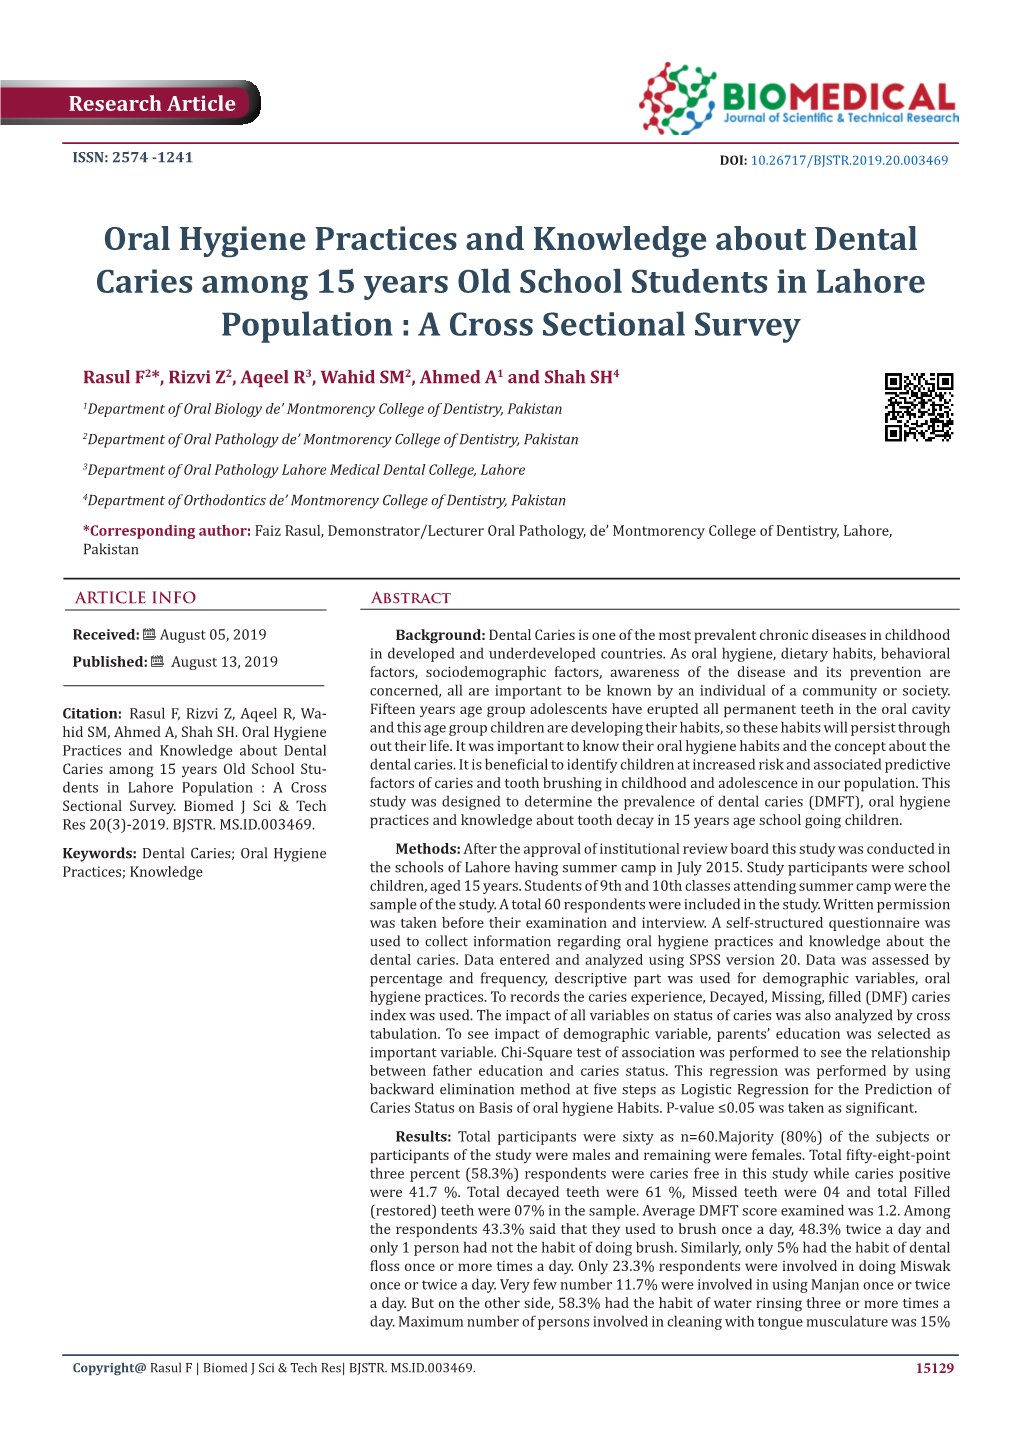 Oral Hygiene Practices and Knowledge About Dental Caries Among 15 Years Old School Students in Lahore Population : a Cross Sectional Survey